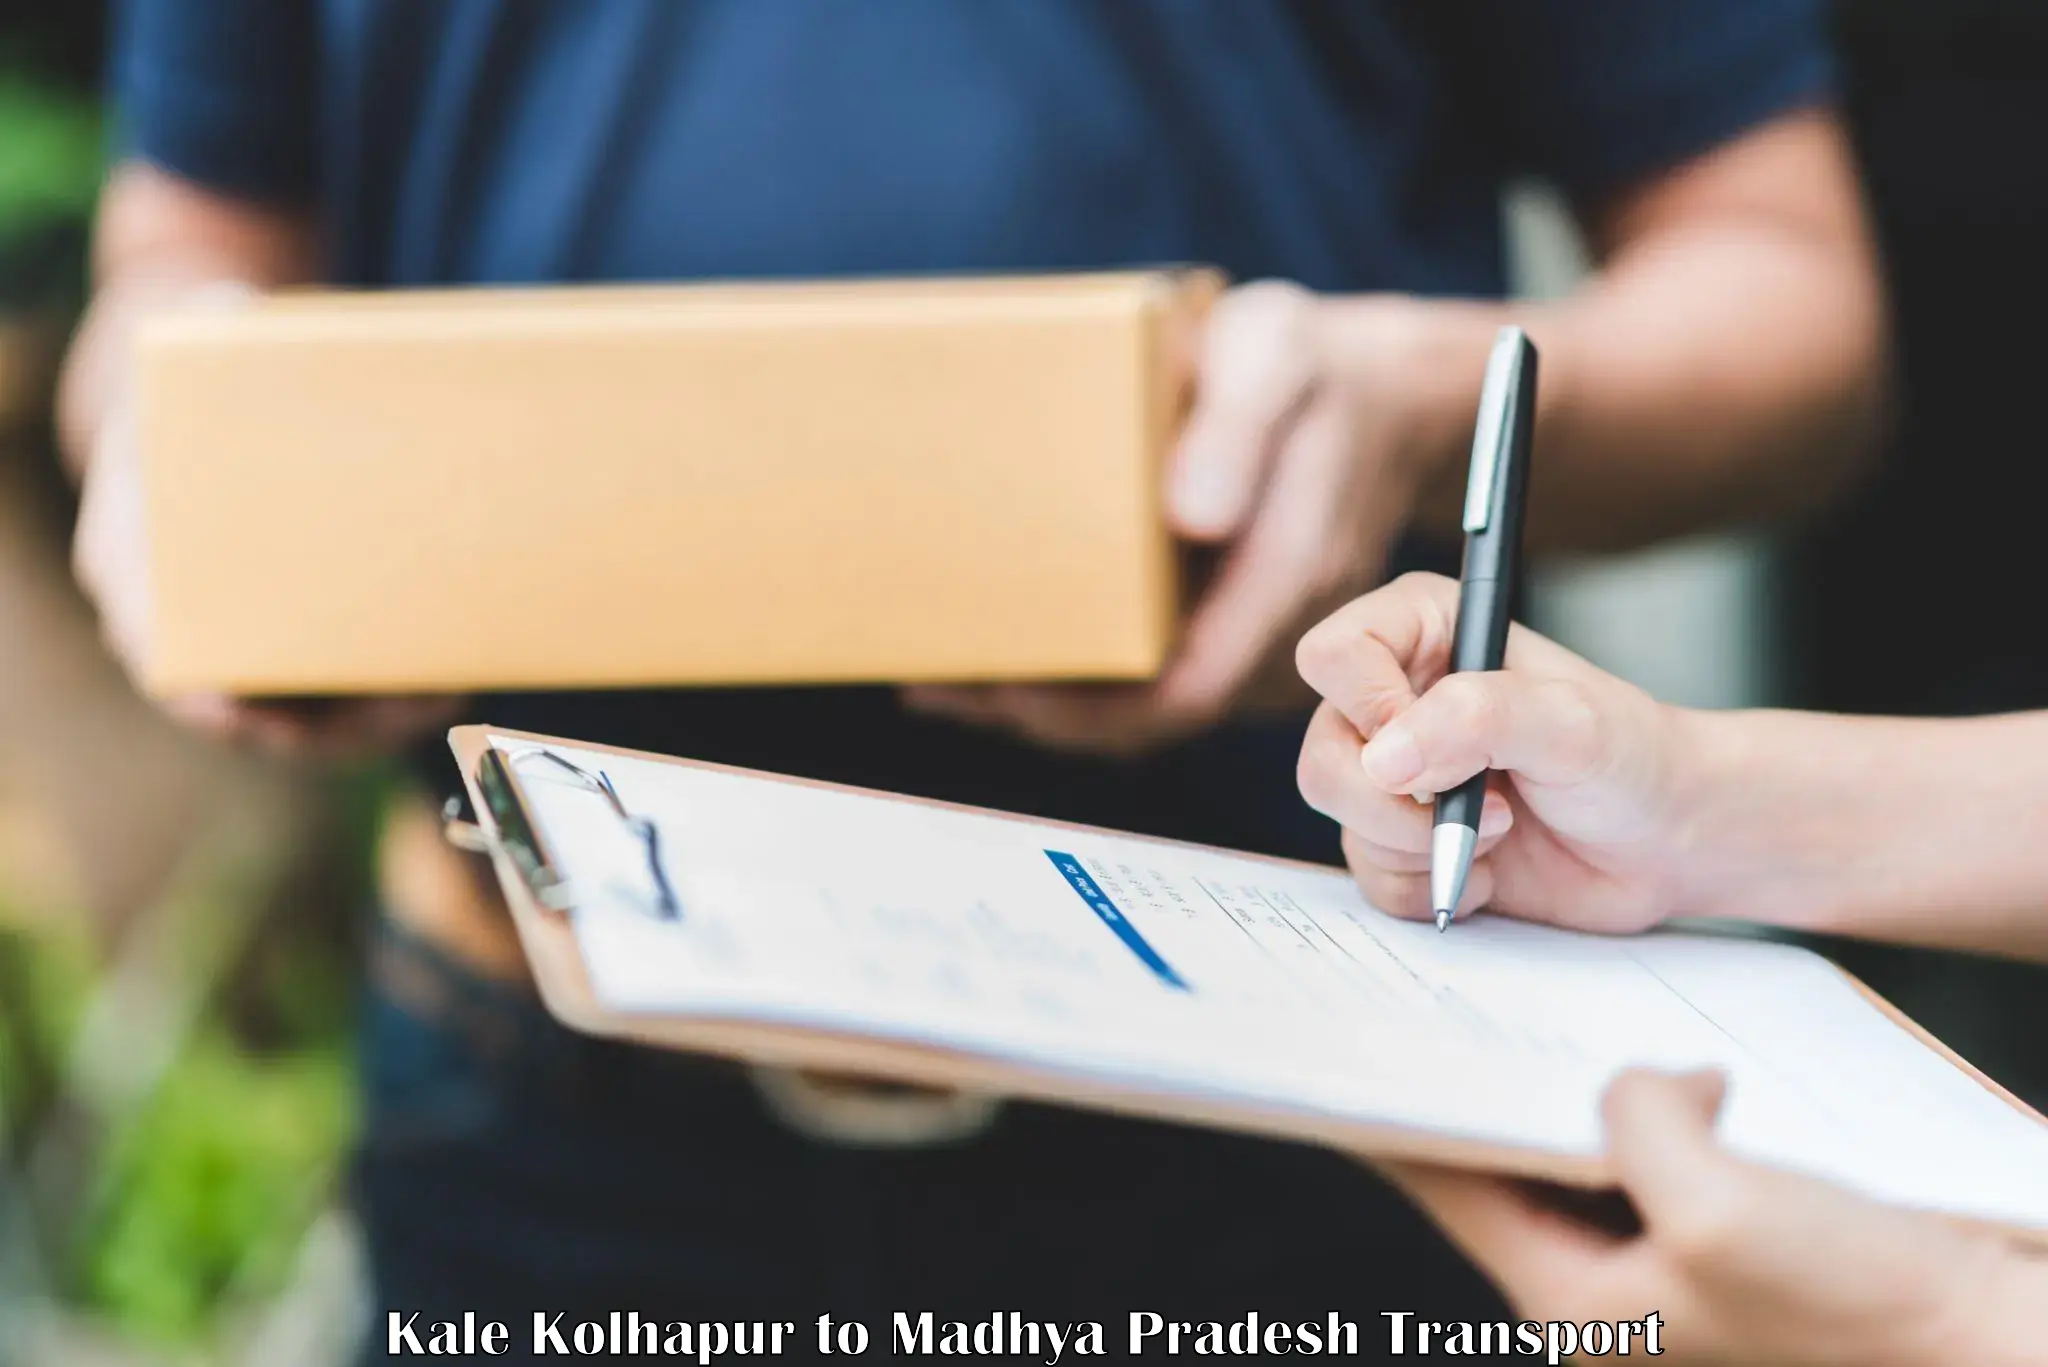 Commercial transport service Kale Kolhapur to IIIT Bhopal